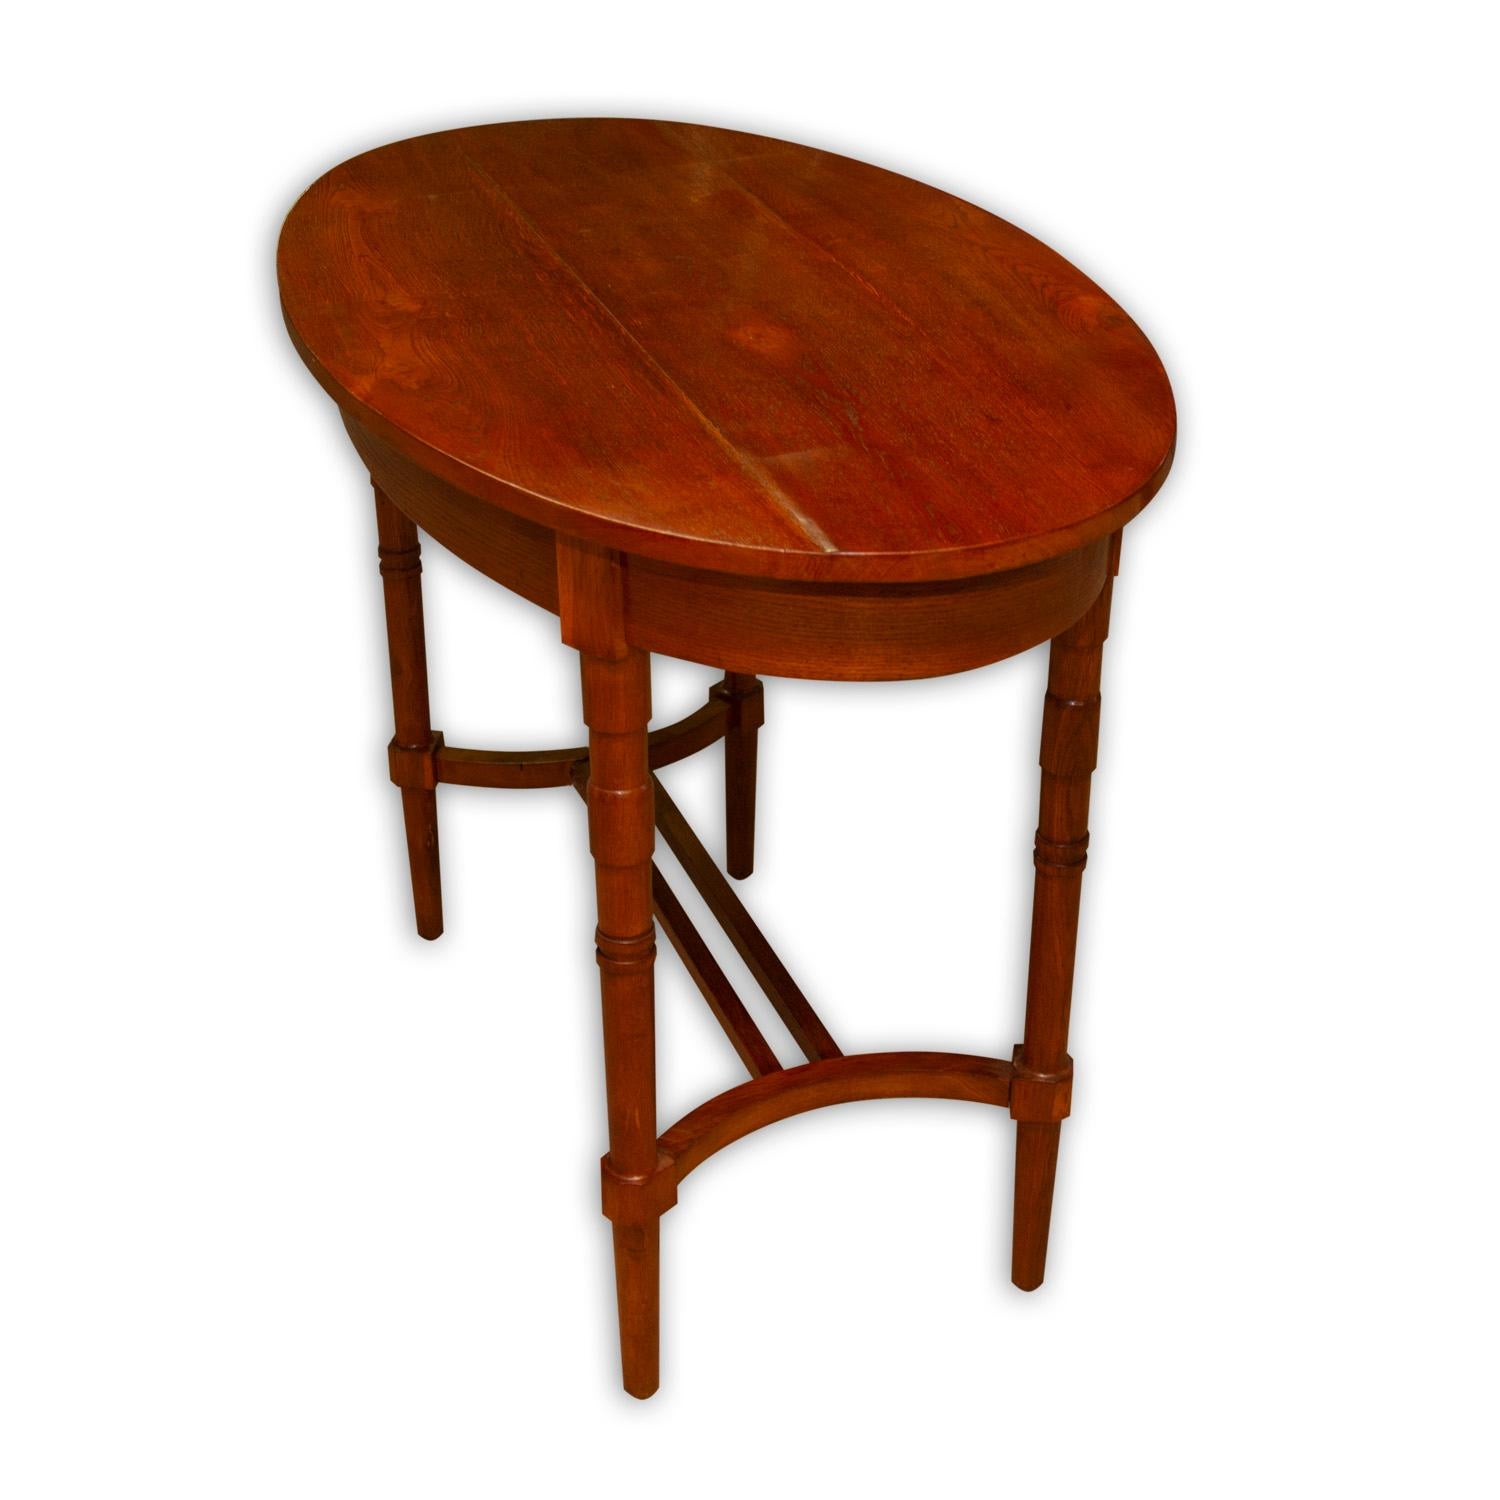 Early 20th Century Secessionist Oak Occasional Table, Austria-Hungary In Excellent Condition For Sale In Prague 8, CZ